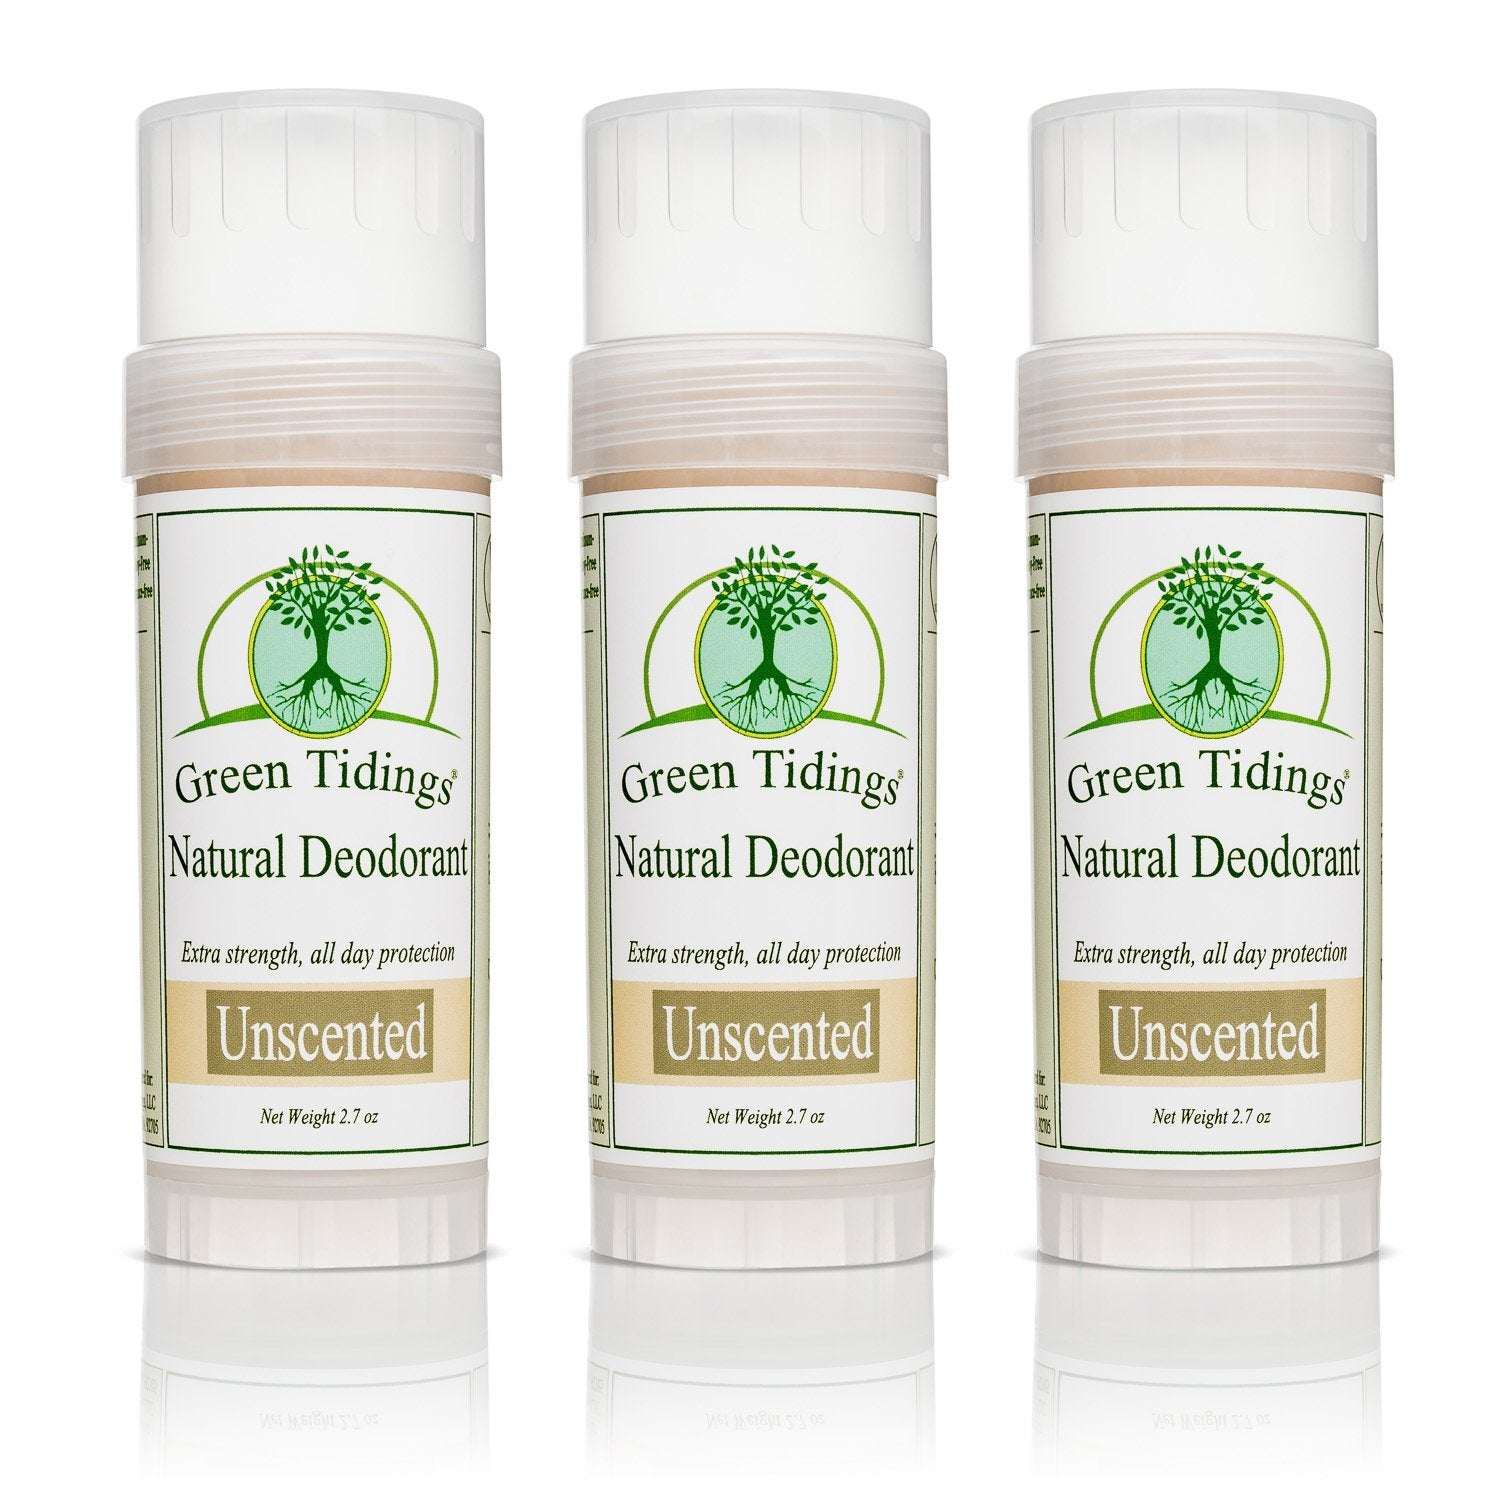 Green Tidings All Natural Deodorant- Unscented, 2.7 Ounces 3 PACK - Green Tidings